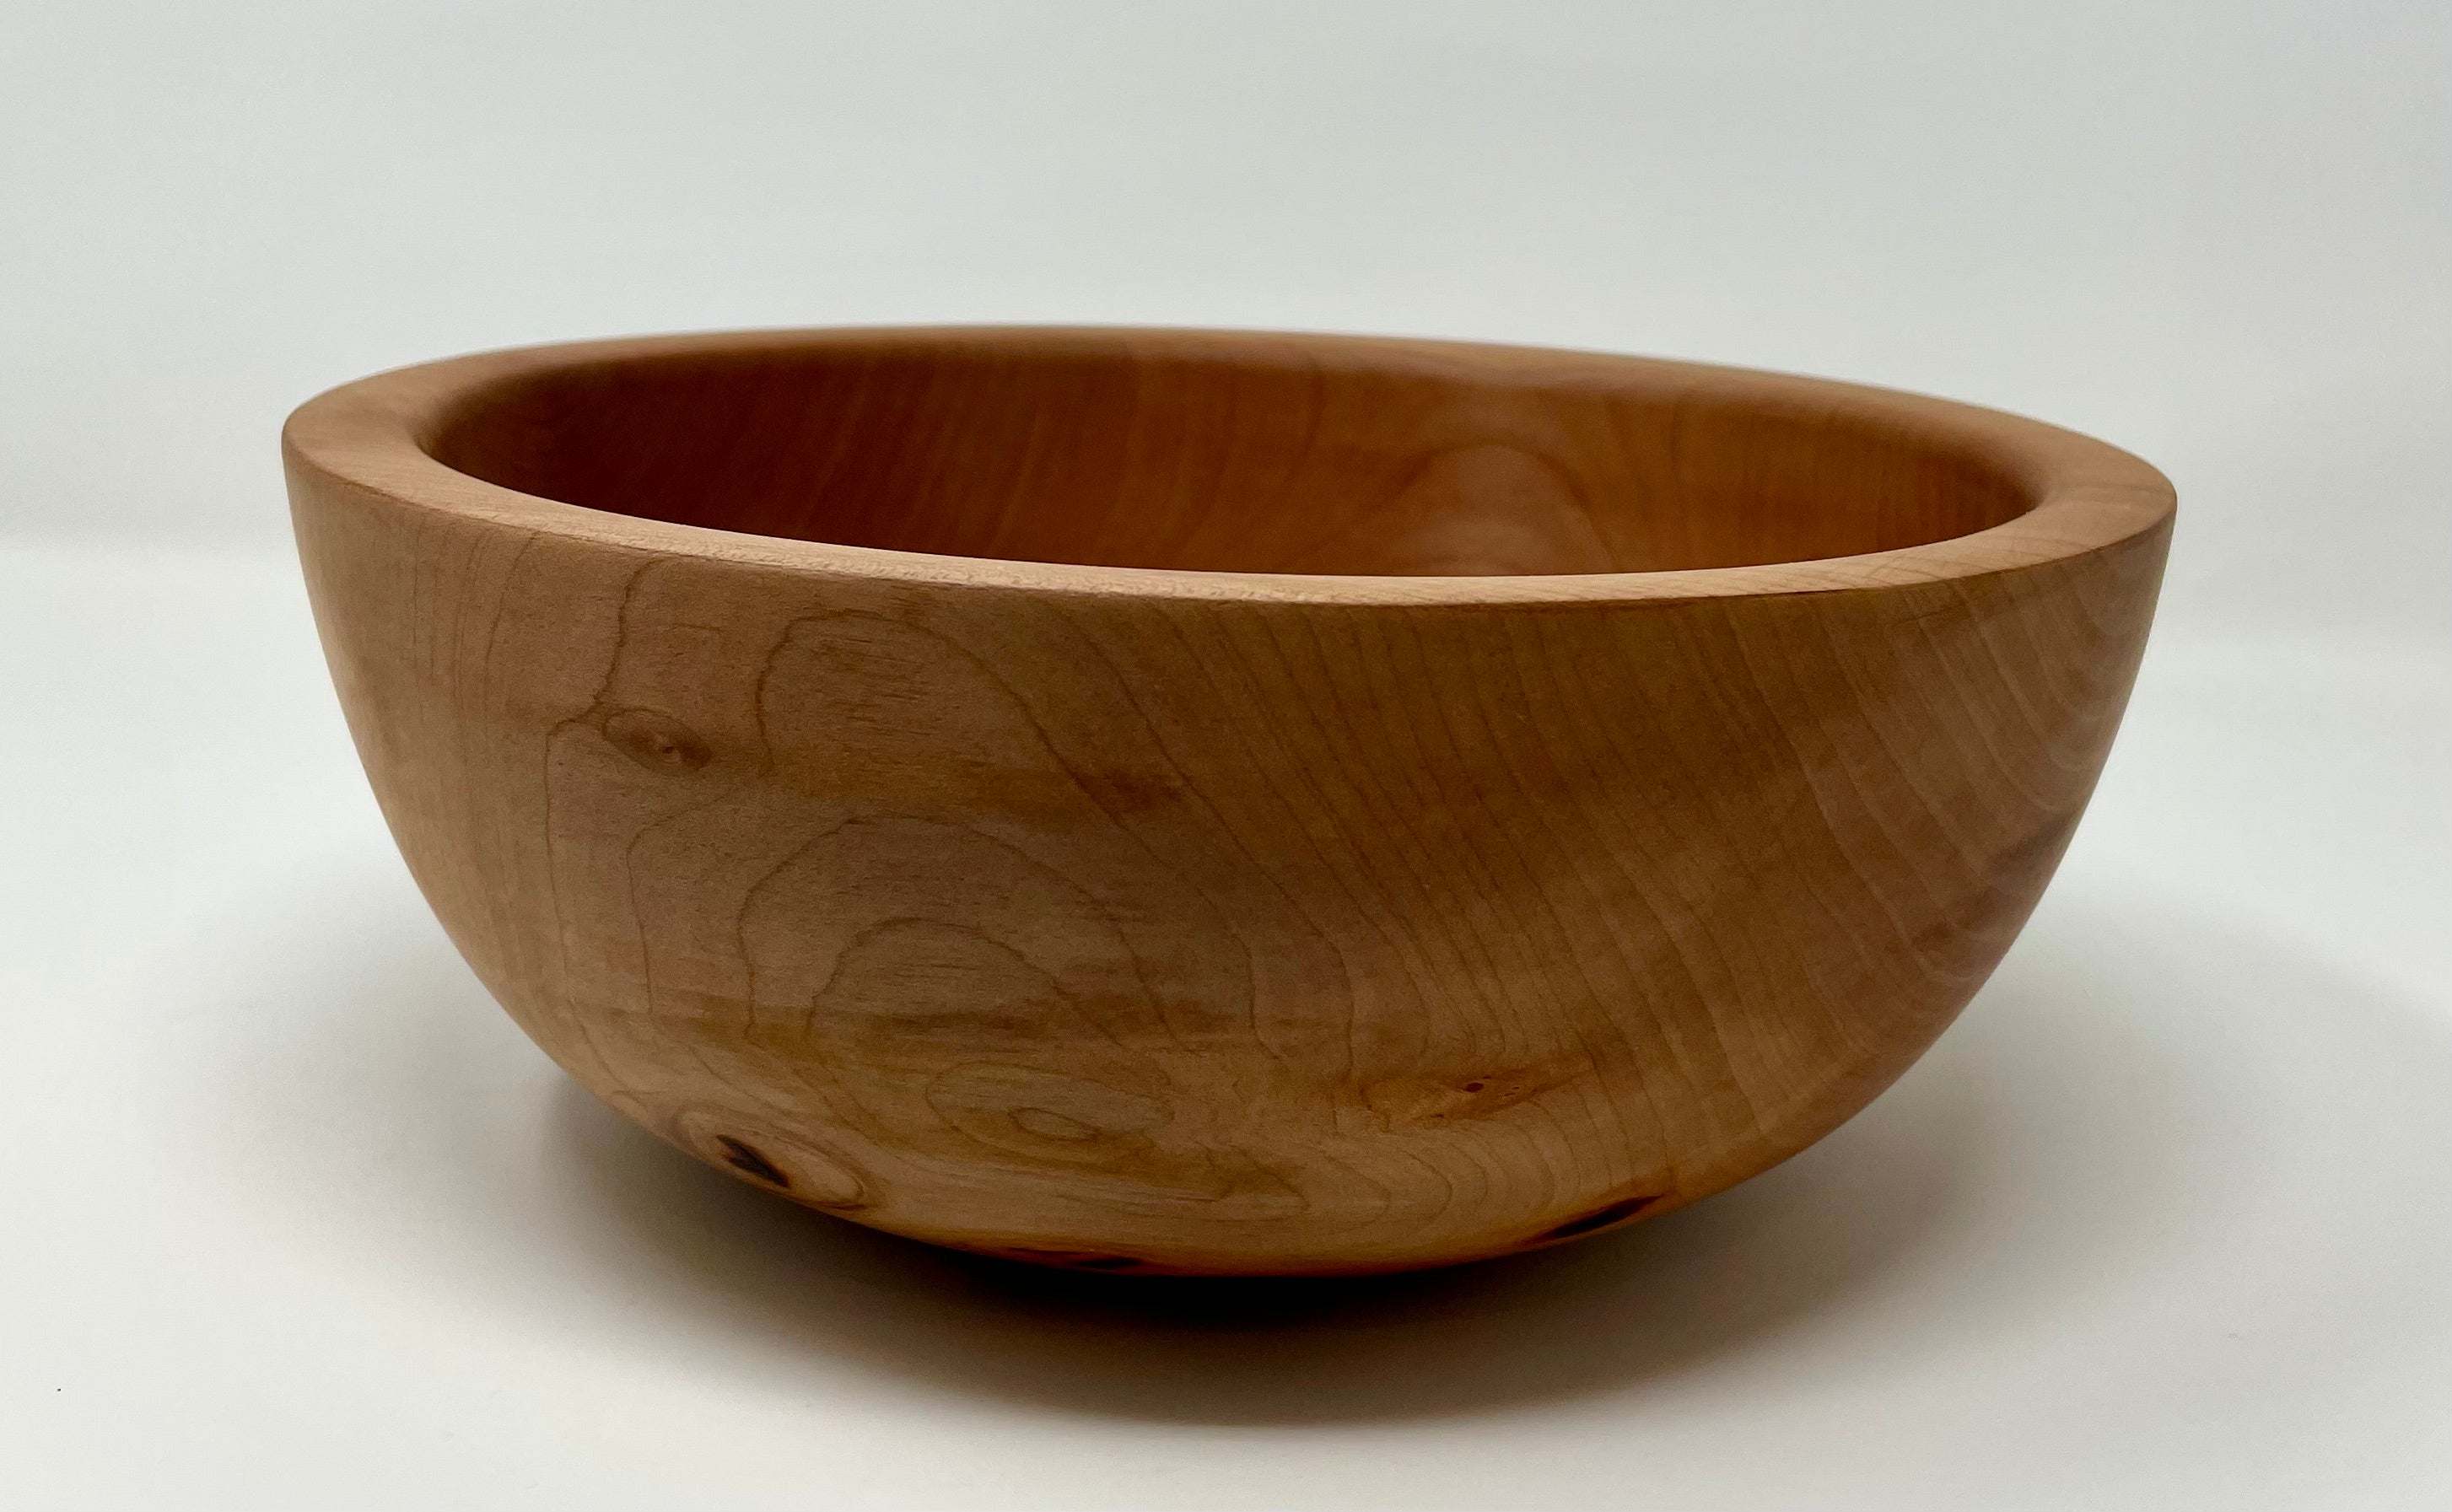 Madrone Bowl with Turquoise